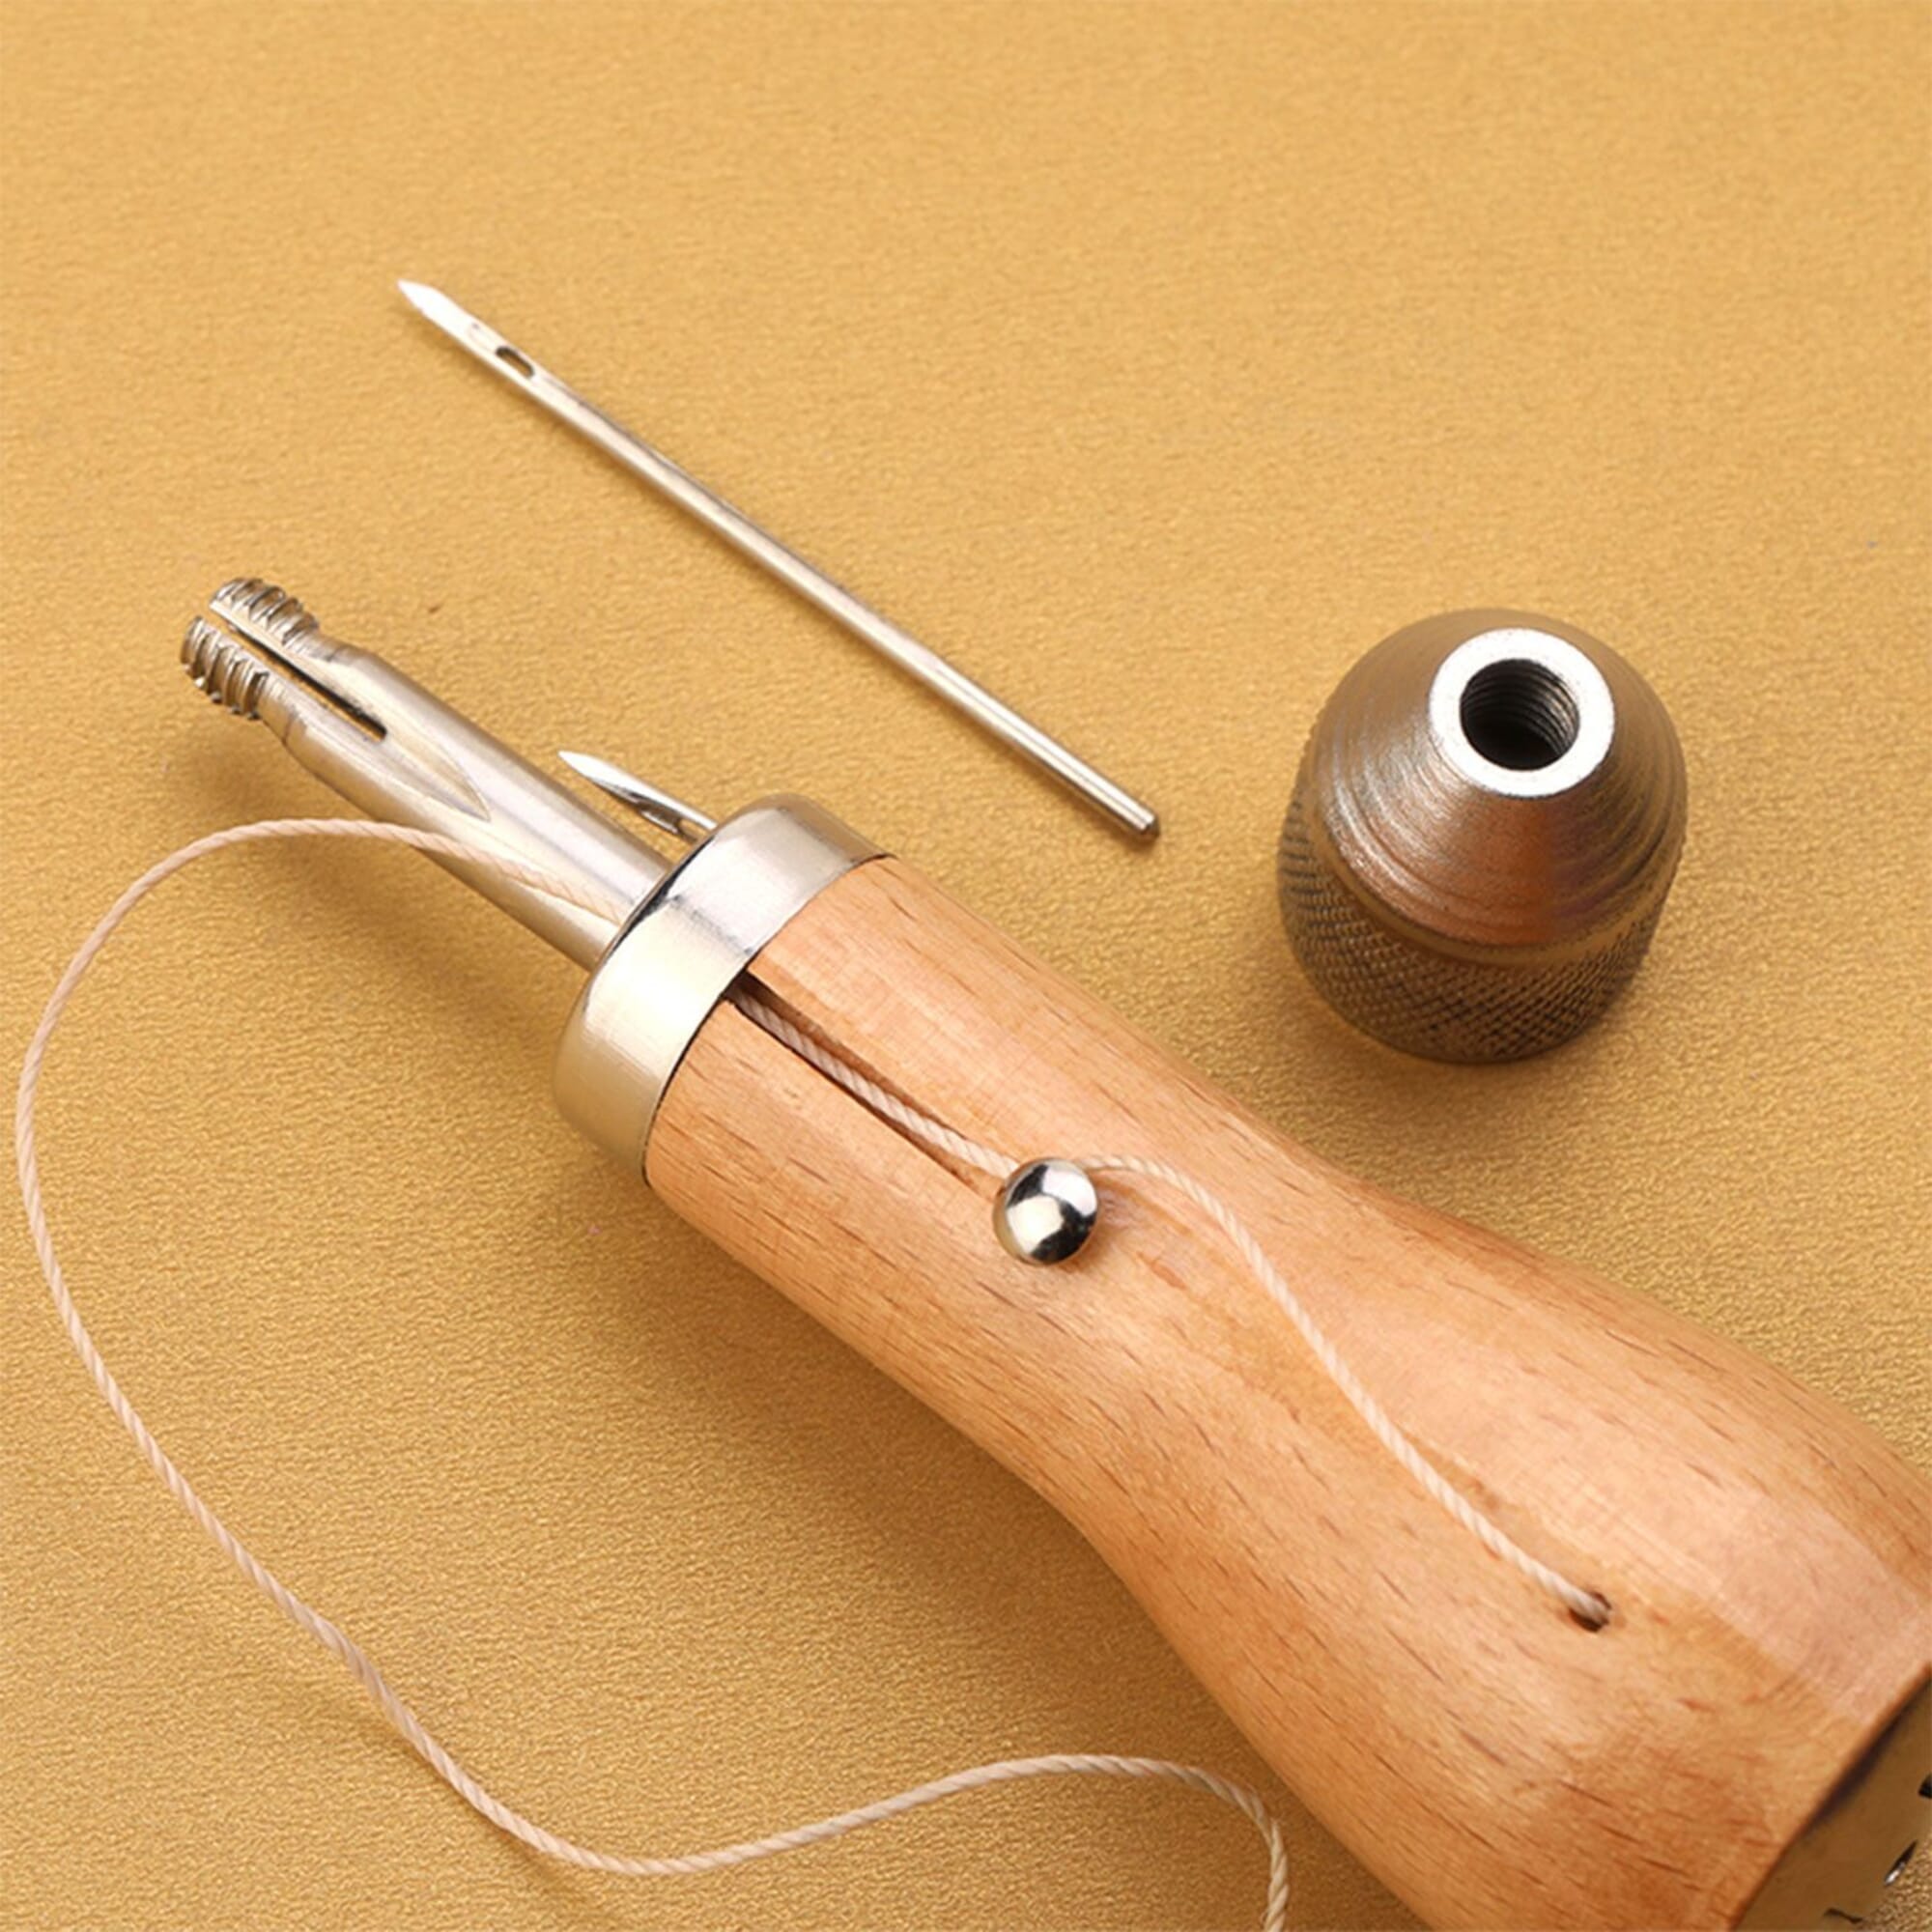 Leather Sewing awl, Speedy Stitcher Sewing Awl Kit, Leather Hand Sewing Awl  Professional Stitcher Needles Kit for DIY Leathercraft Canvas Bags